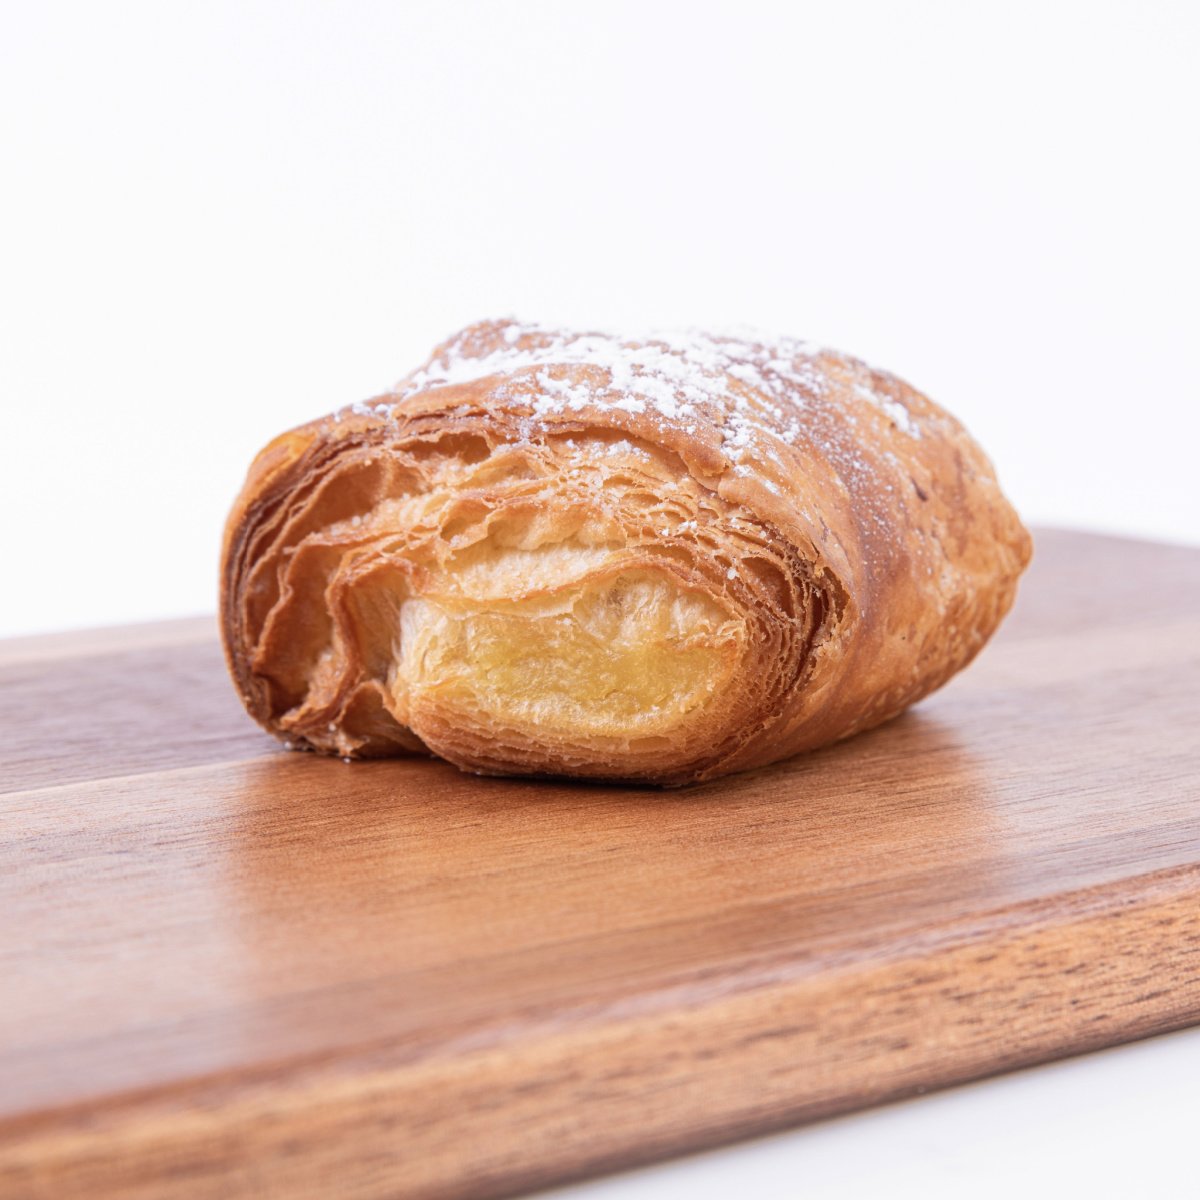 sugar puff pastry on a wooden board